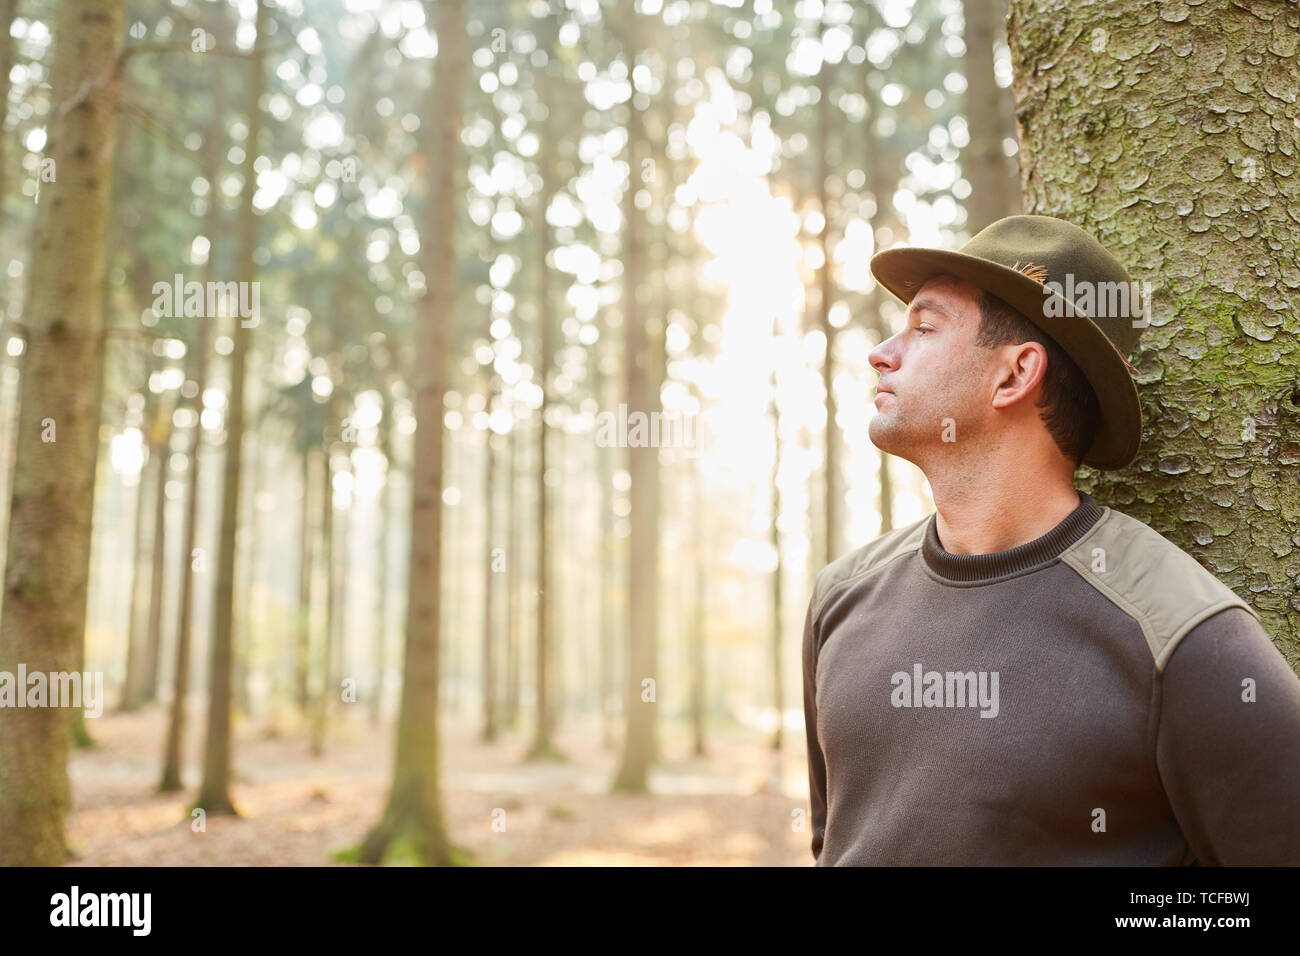 Forester with responsibility looks at trees in his forest district Stock Photo